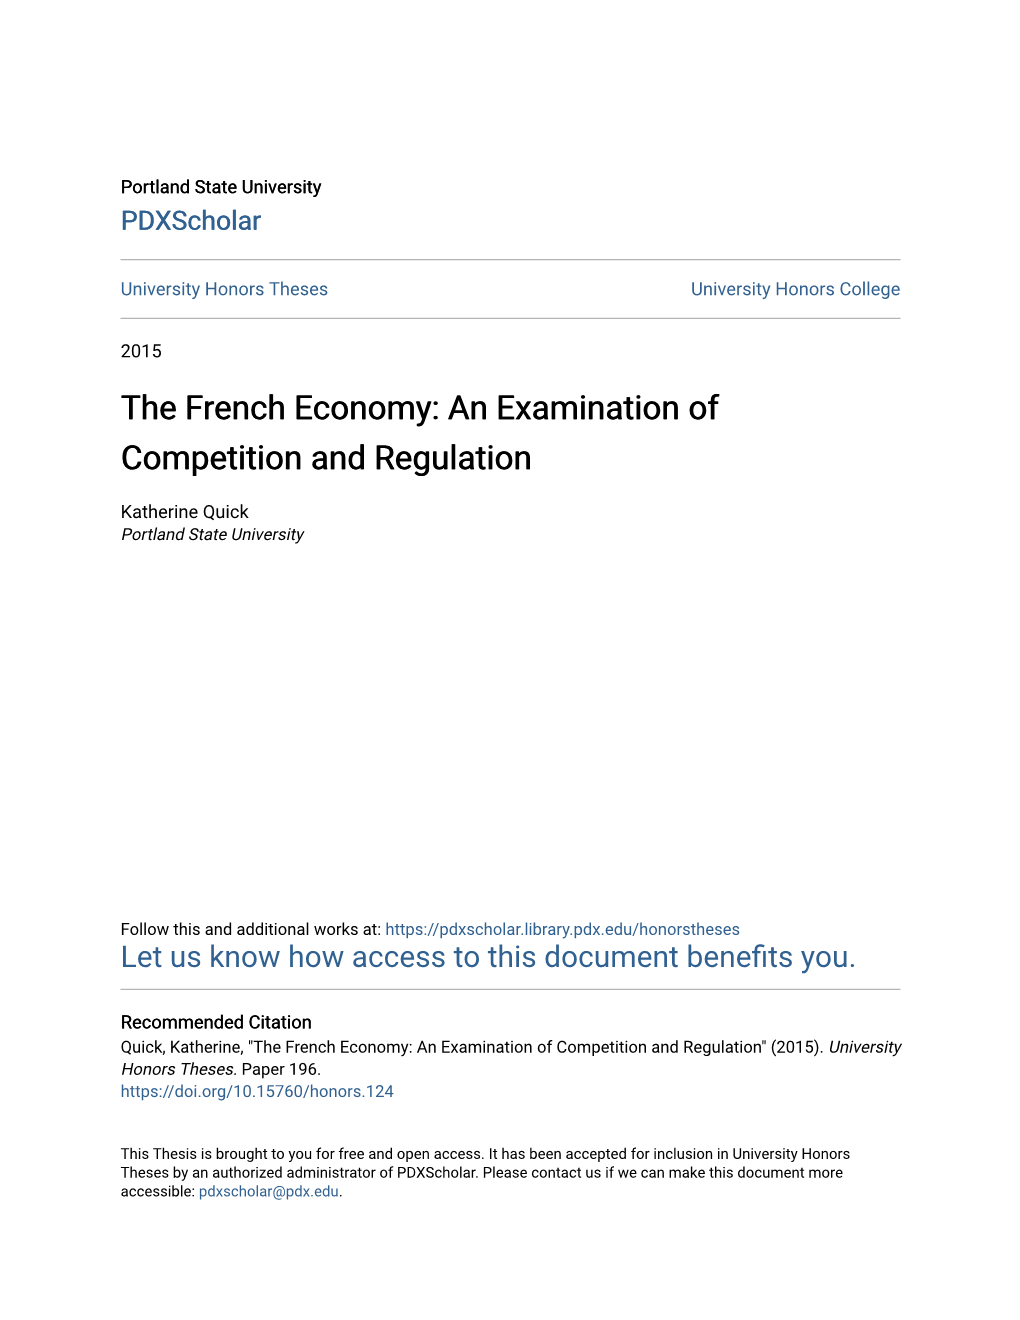 The French Economy: an Examination of Competition and Regulation